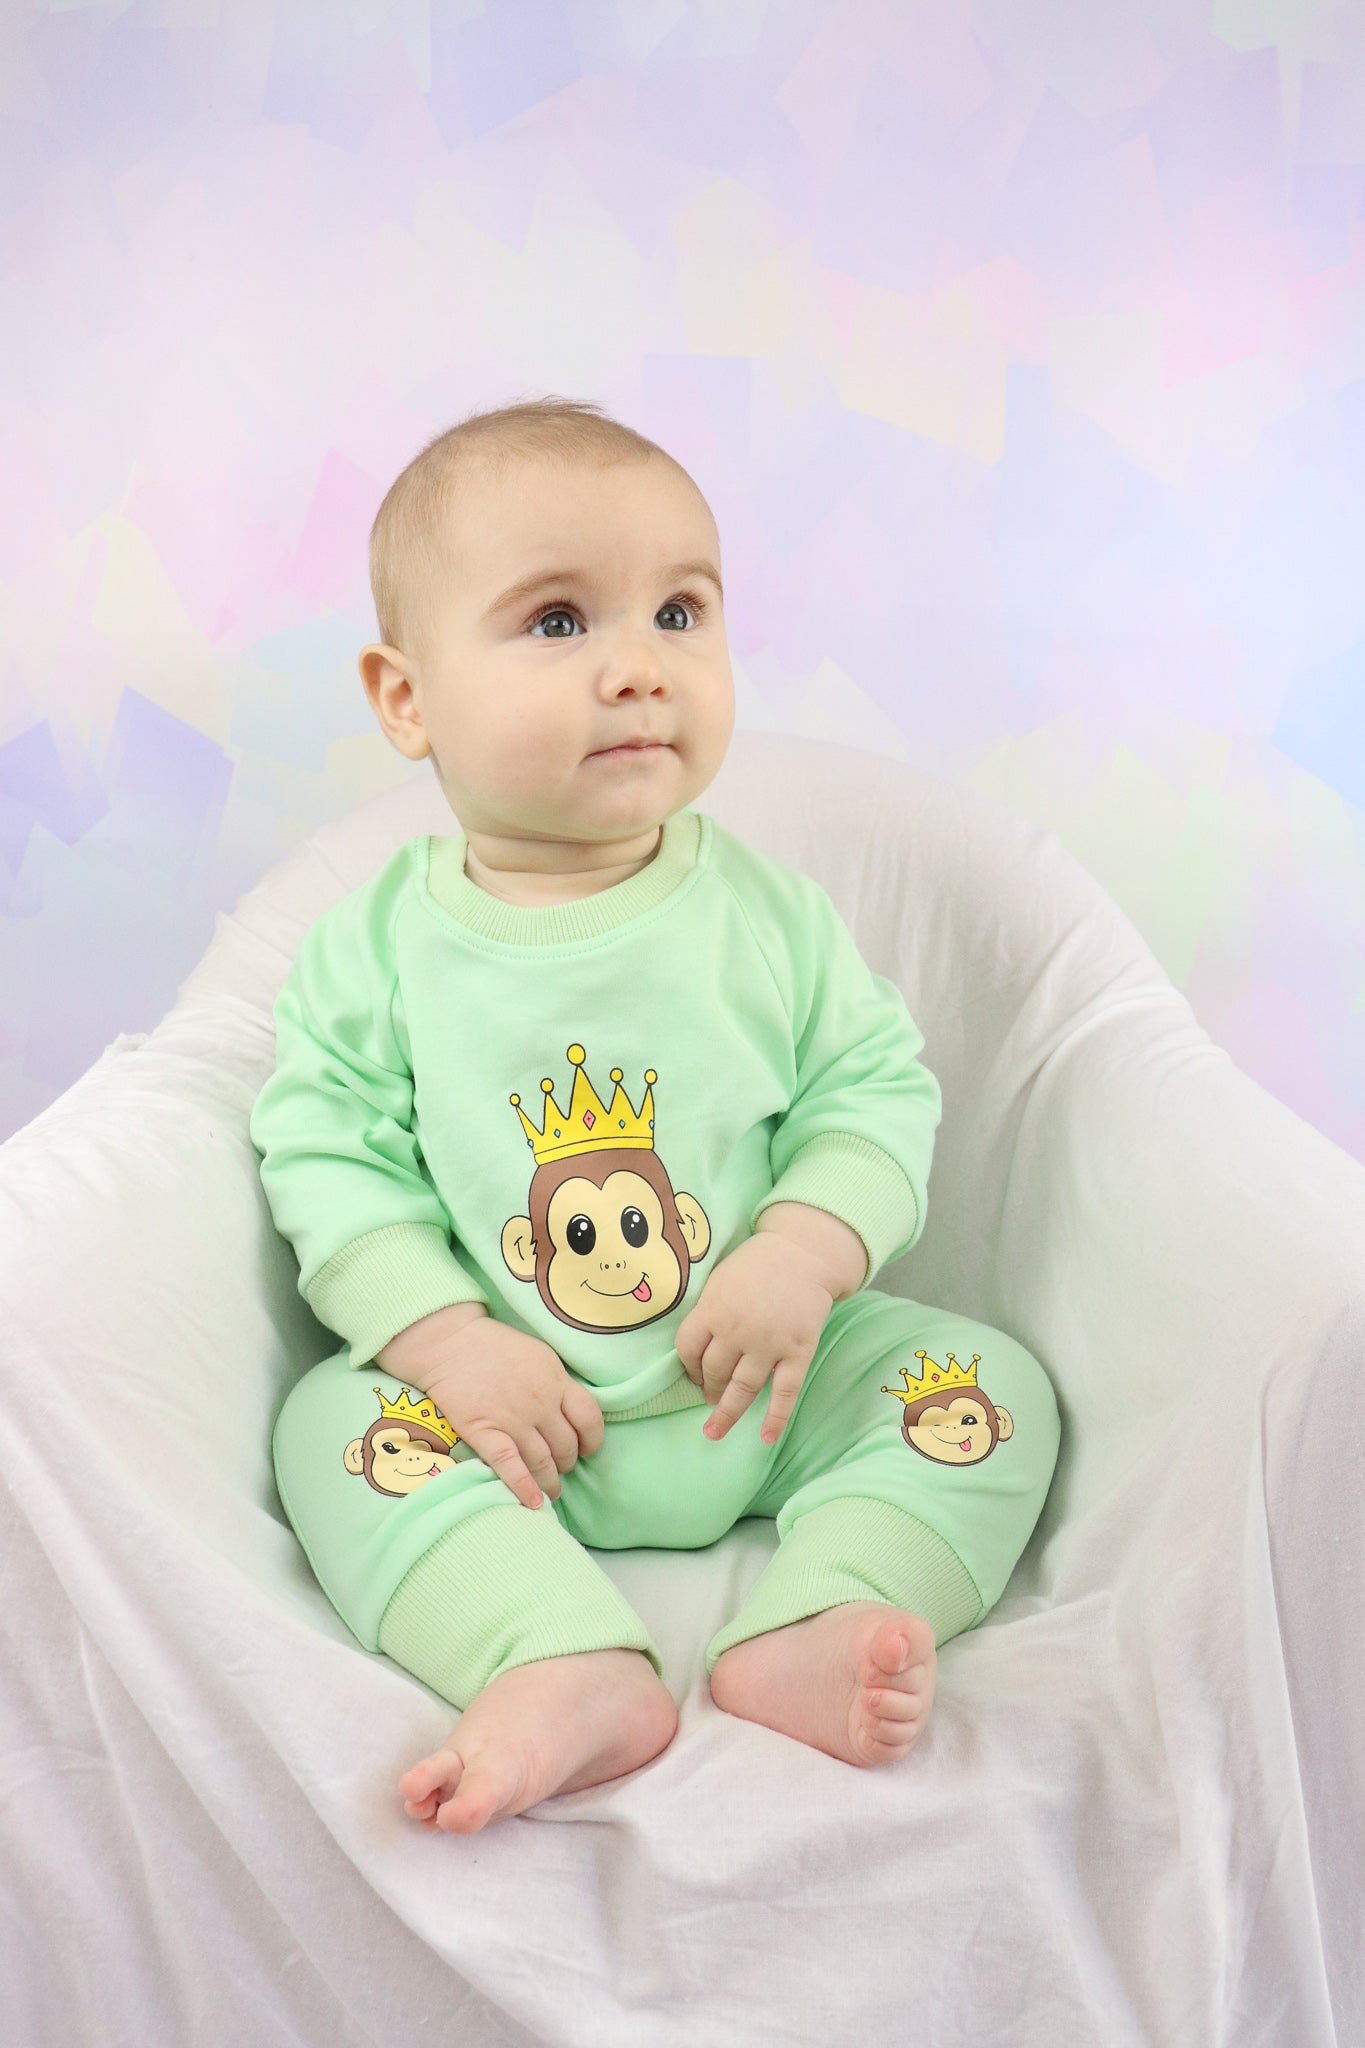 baby boy sitting on a chair wearing a pastel green outfit set with cute monkey faces printed on it